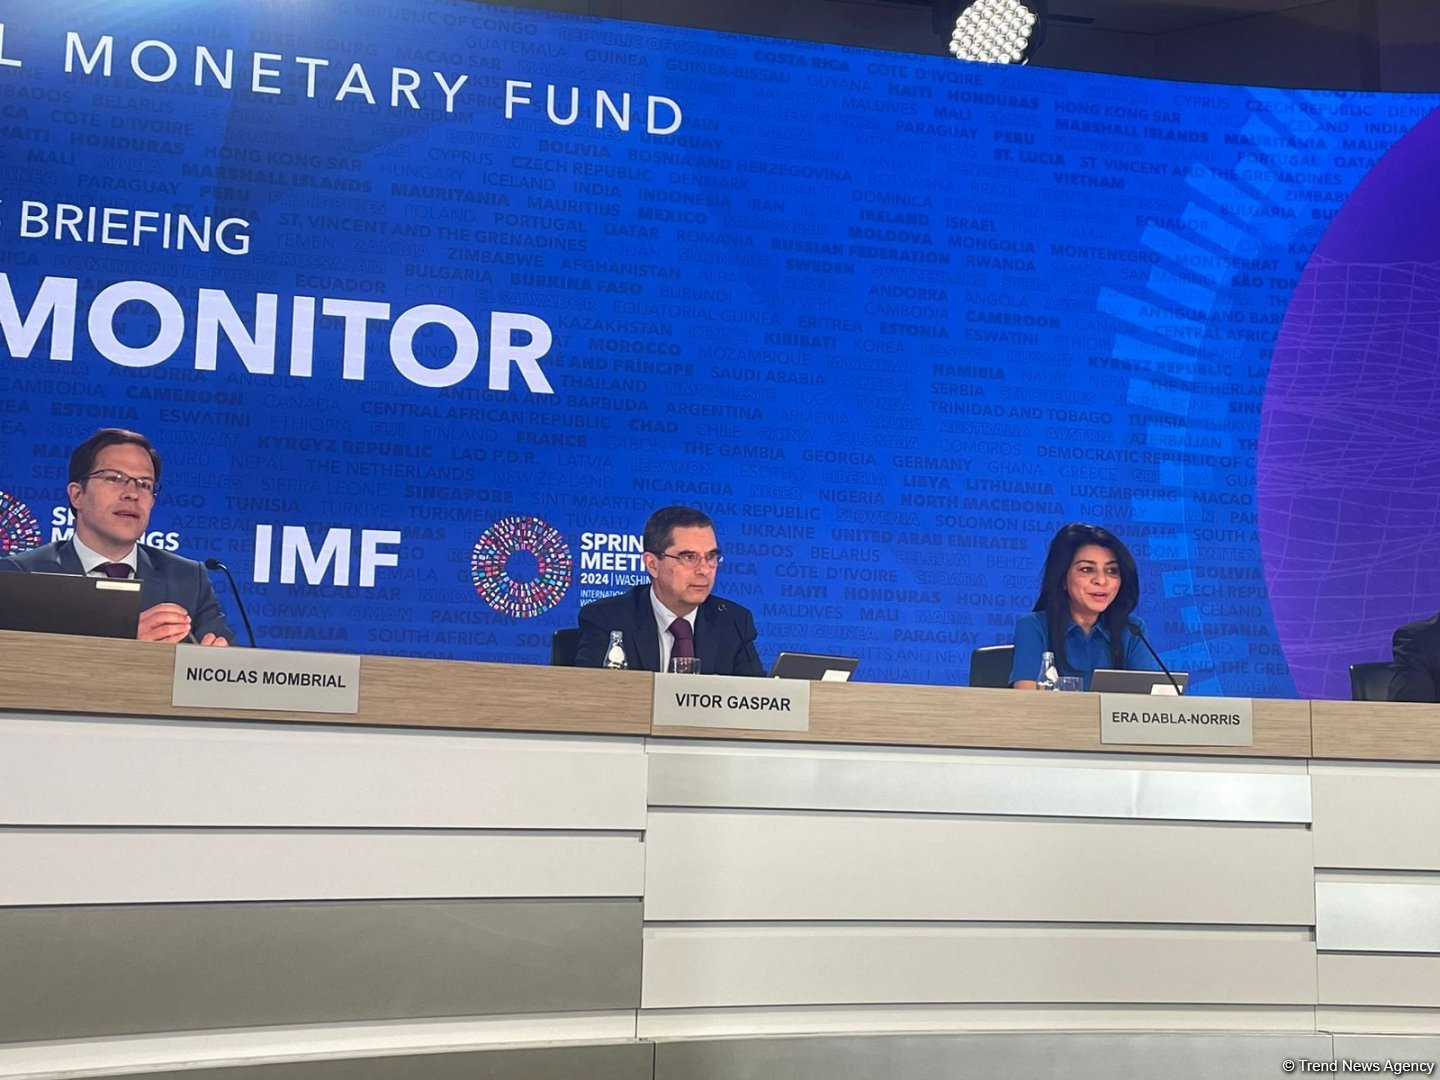 Most emerging markets need adoption of innovation to close gap with developed countries - IMF